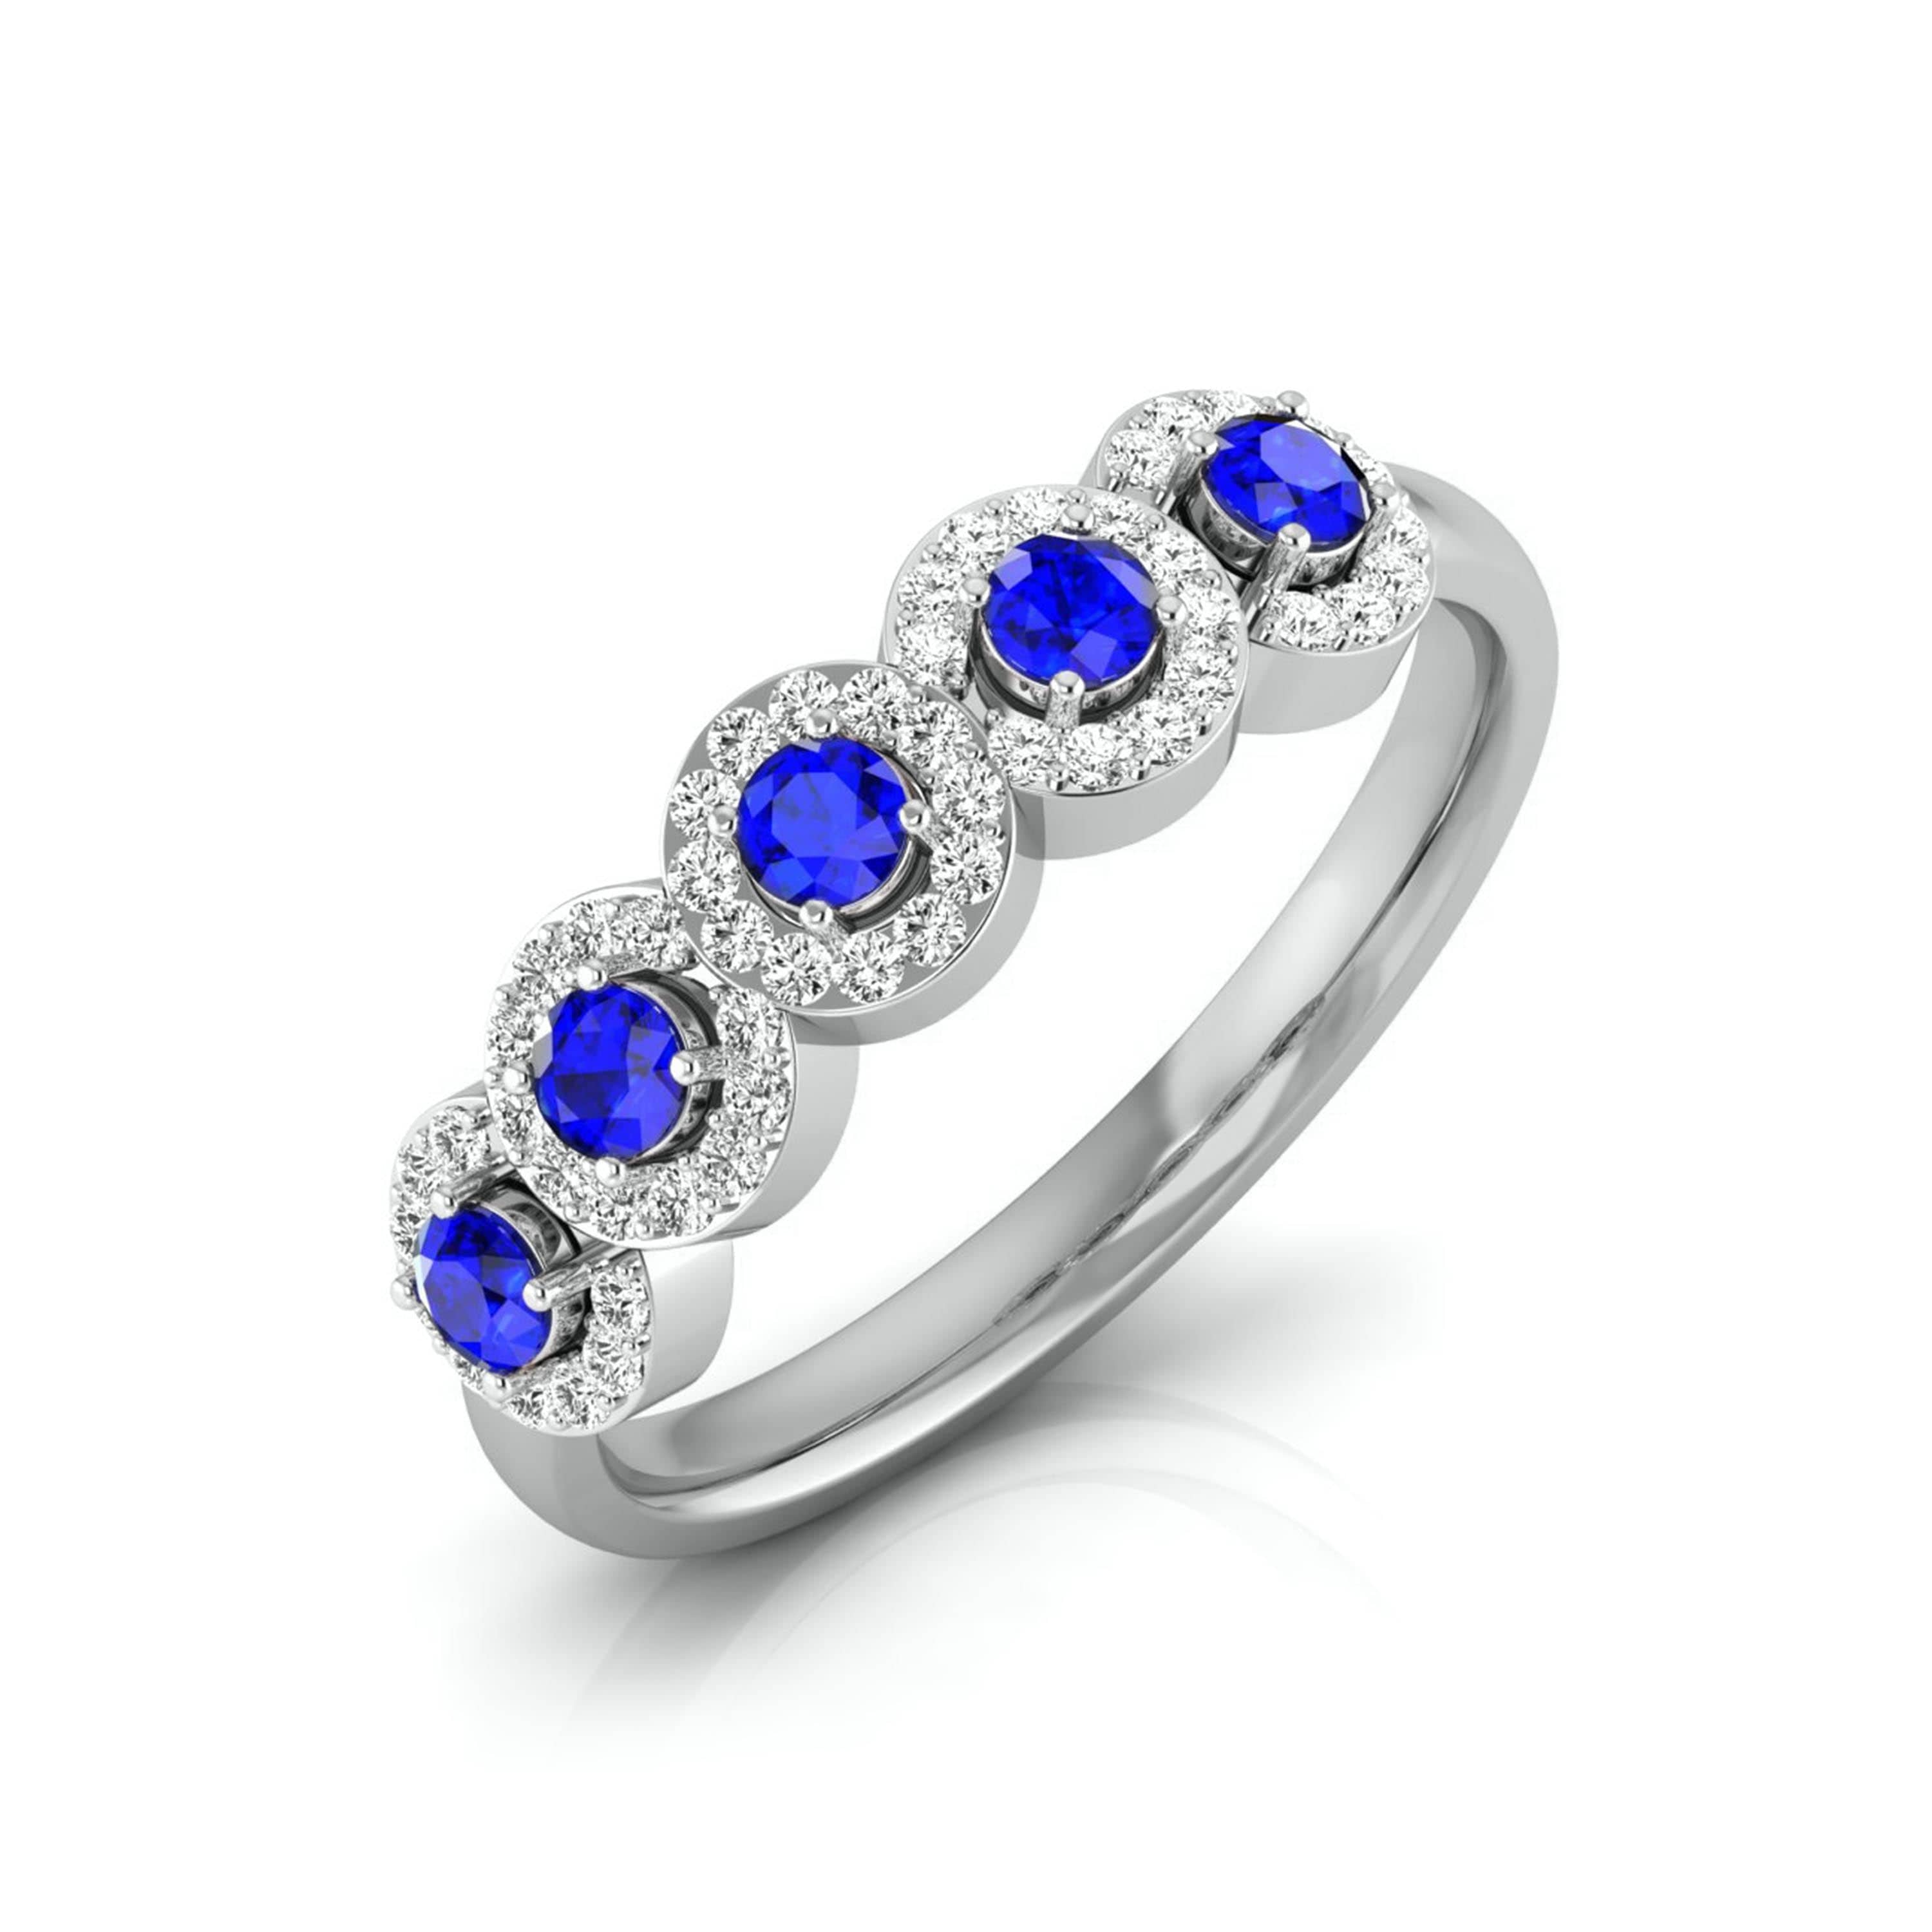 Blue Sapphire Engagement Rings Guide